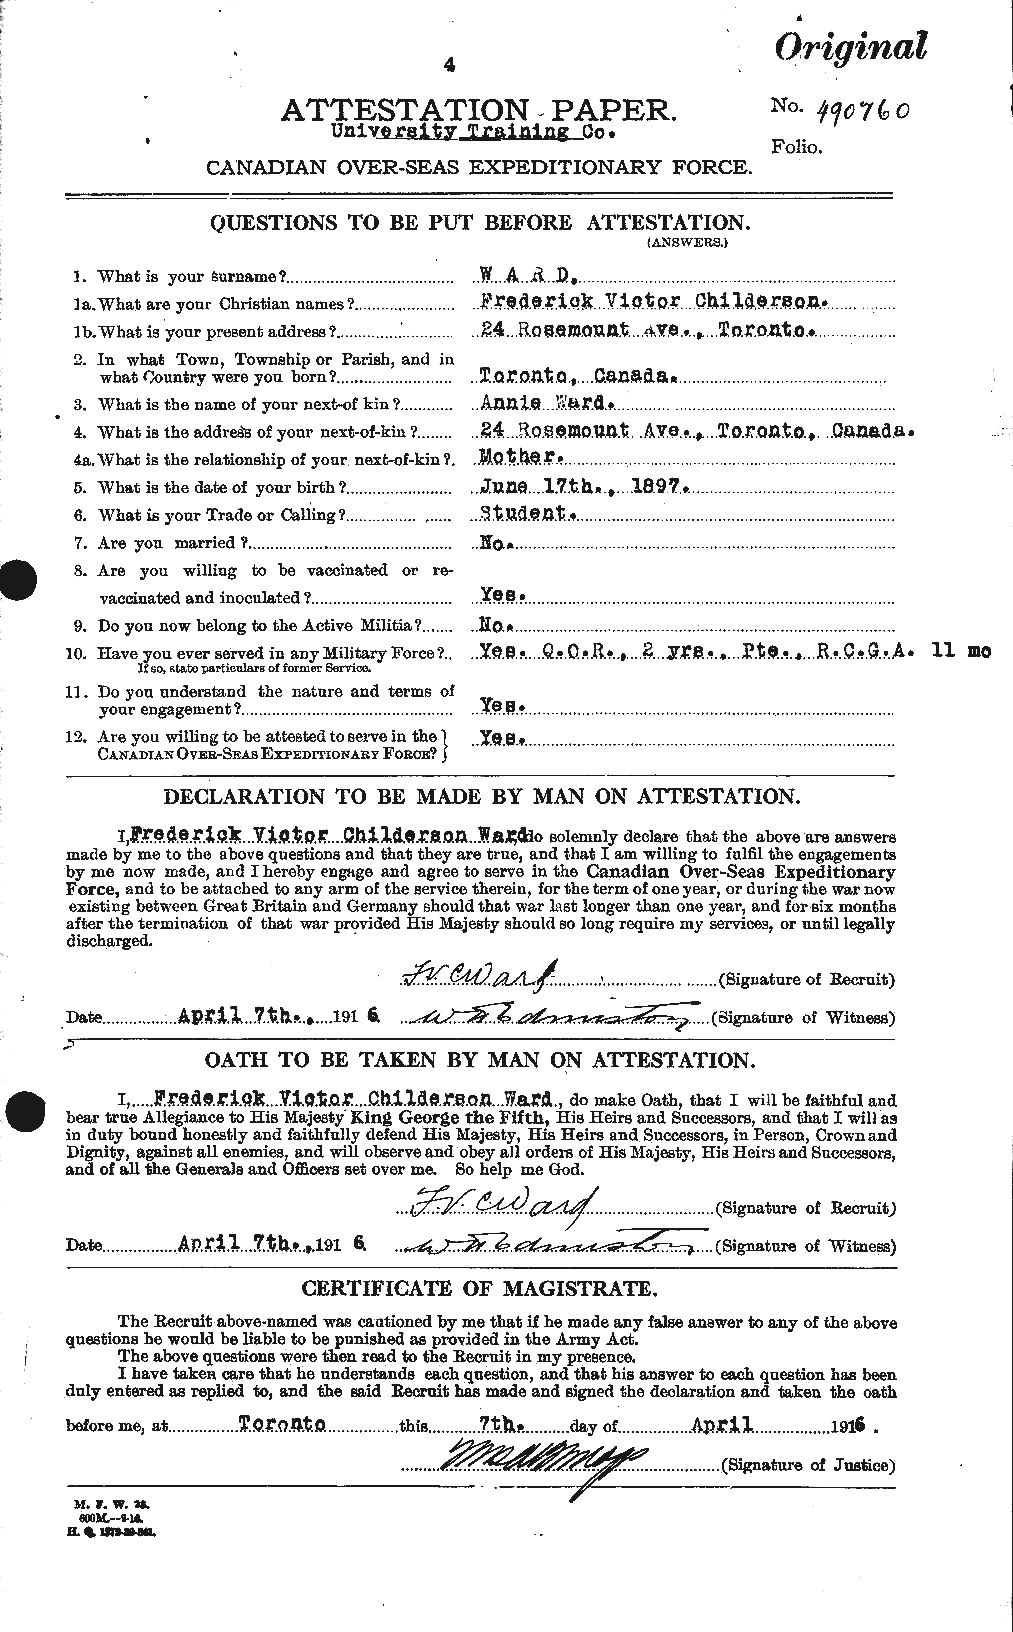 Personnel Records of the First World War - CEF 657730a